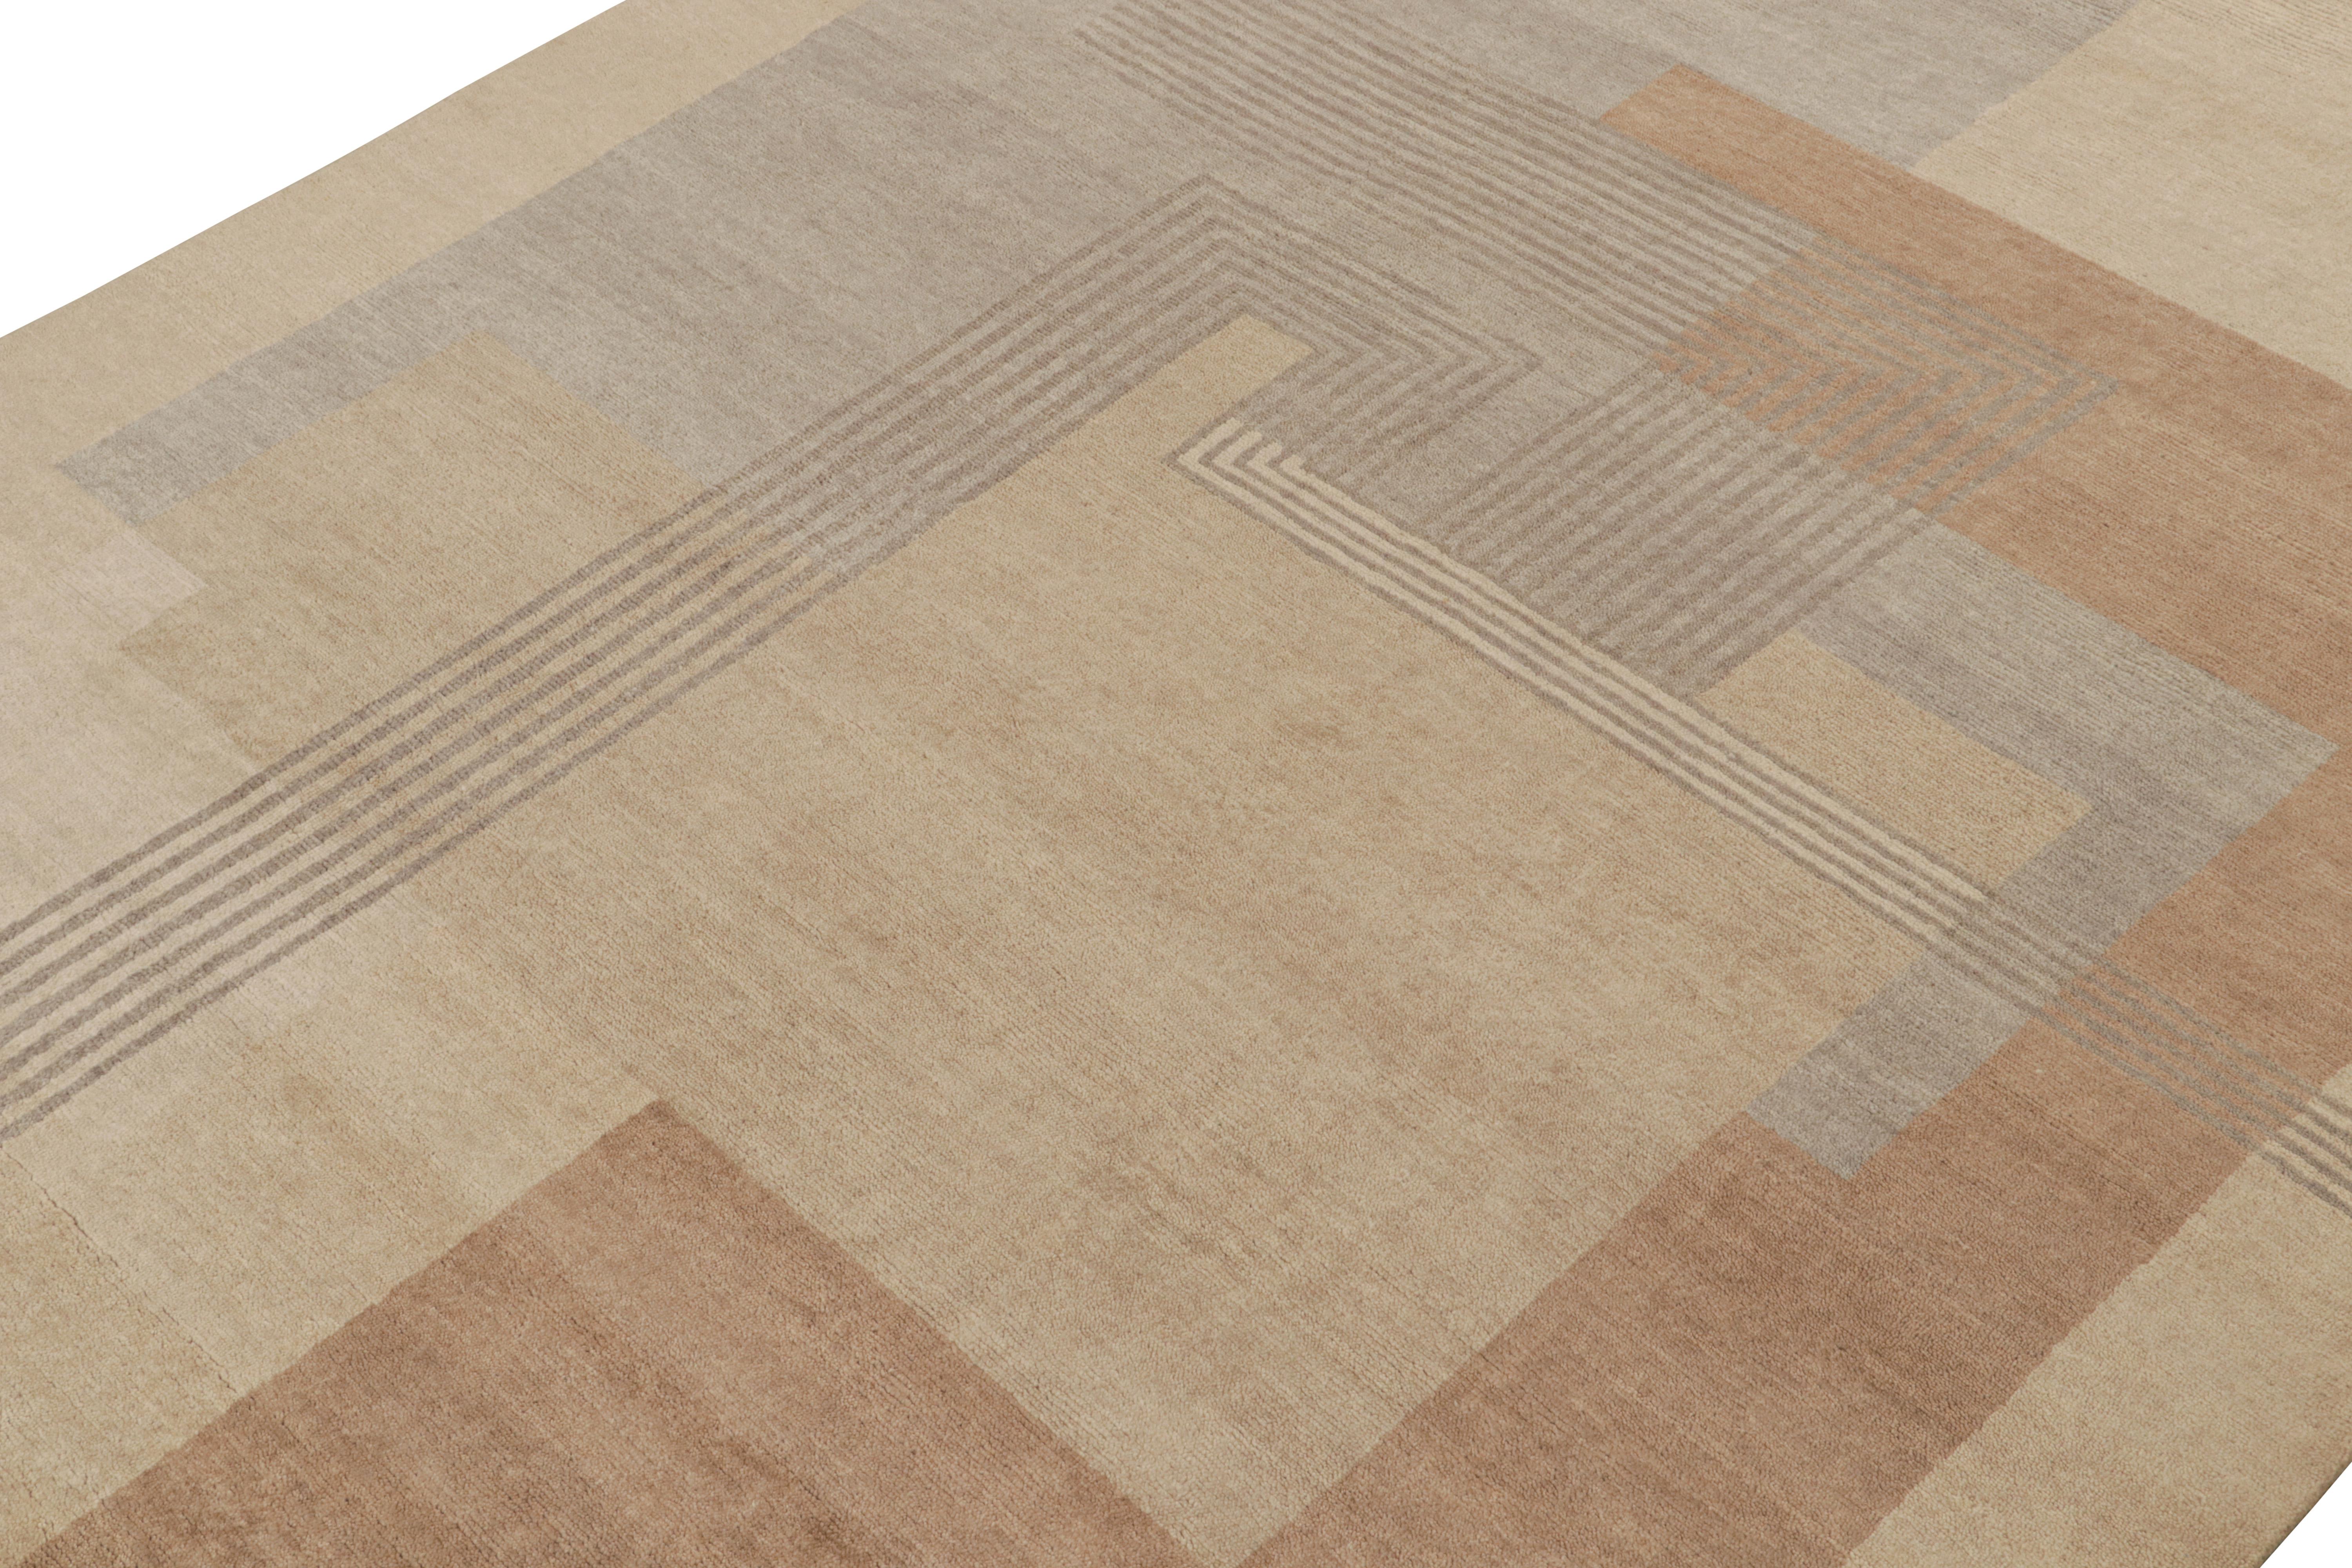 Hand-knotted in wool, this 9x12 ode to French Art Deco rugs is the next addition to Rug & Kilim’s contemporary Art Deco Collection. 

Further on the Design: 

Connoisseurs will admire this as an homage to cubist sensibilities of the 1920s, and